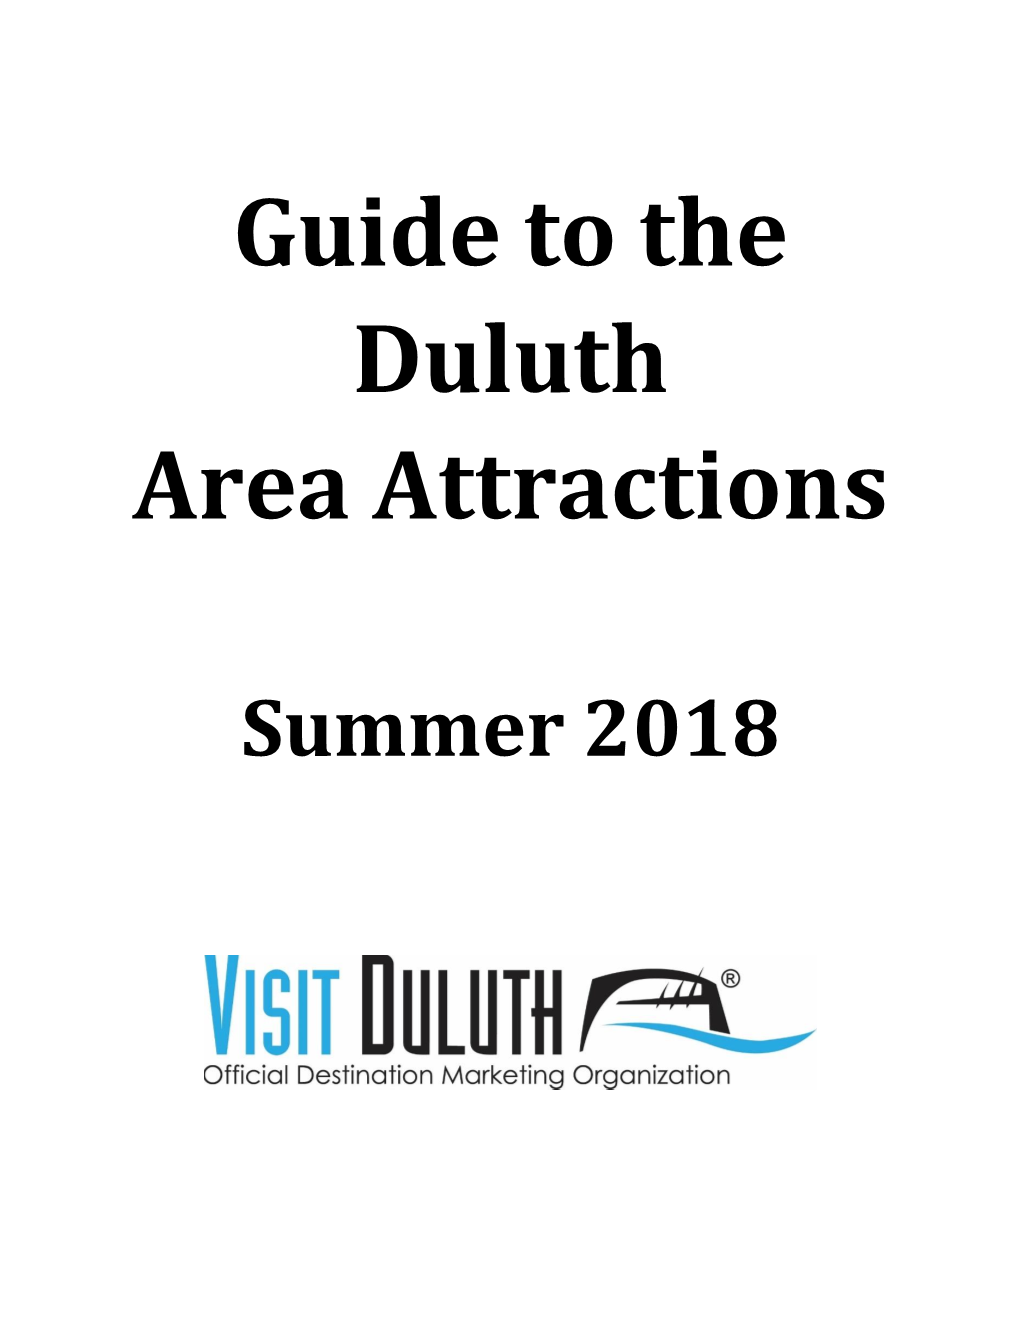 Guide to the Duluth Area Attractions